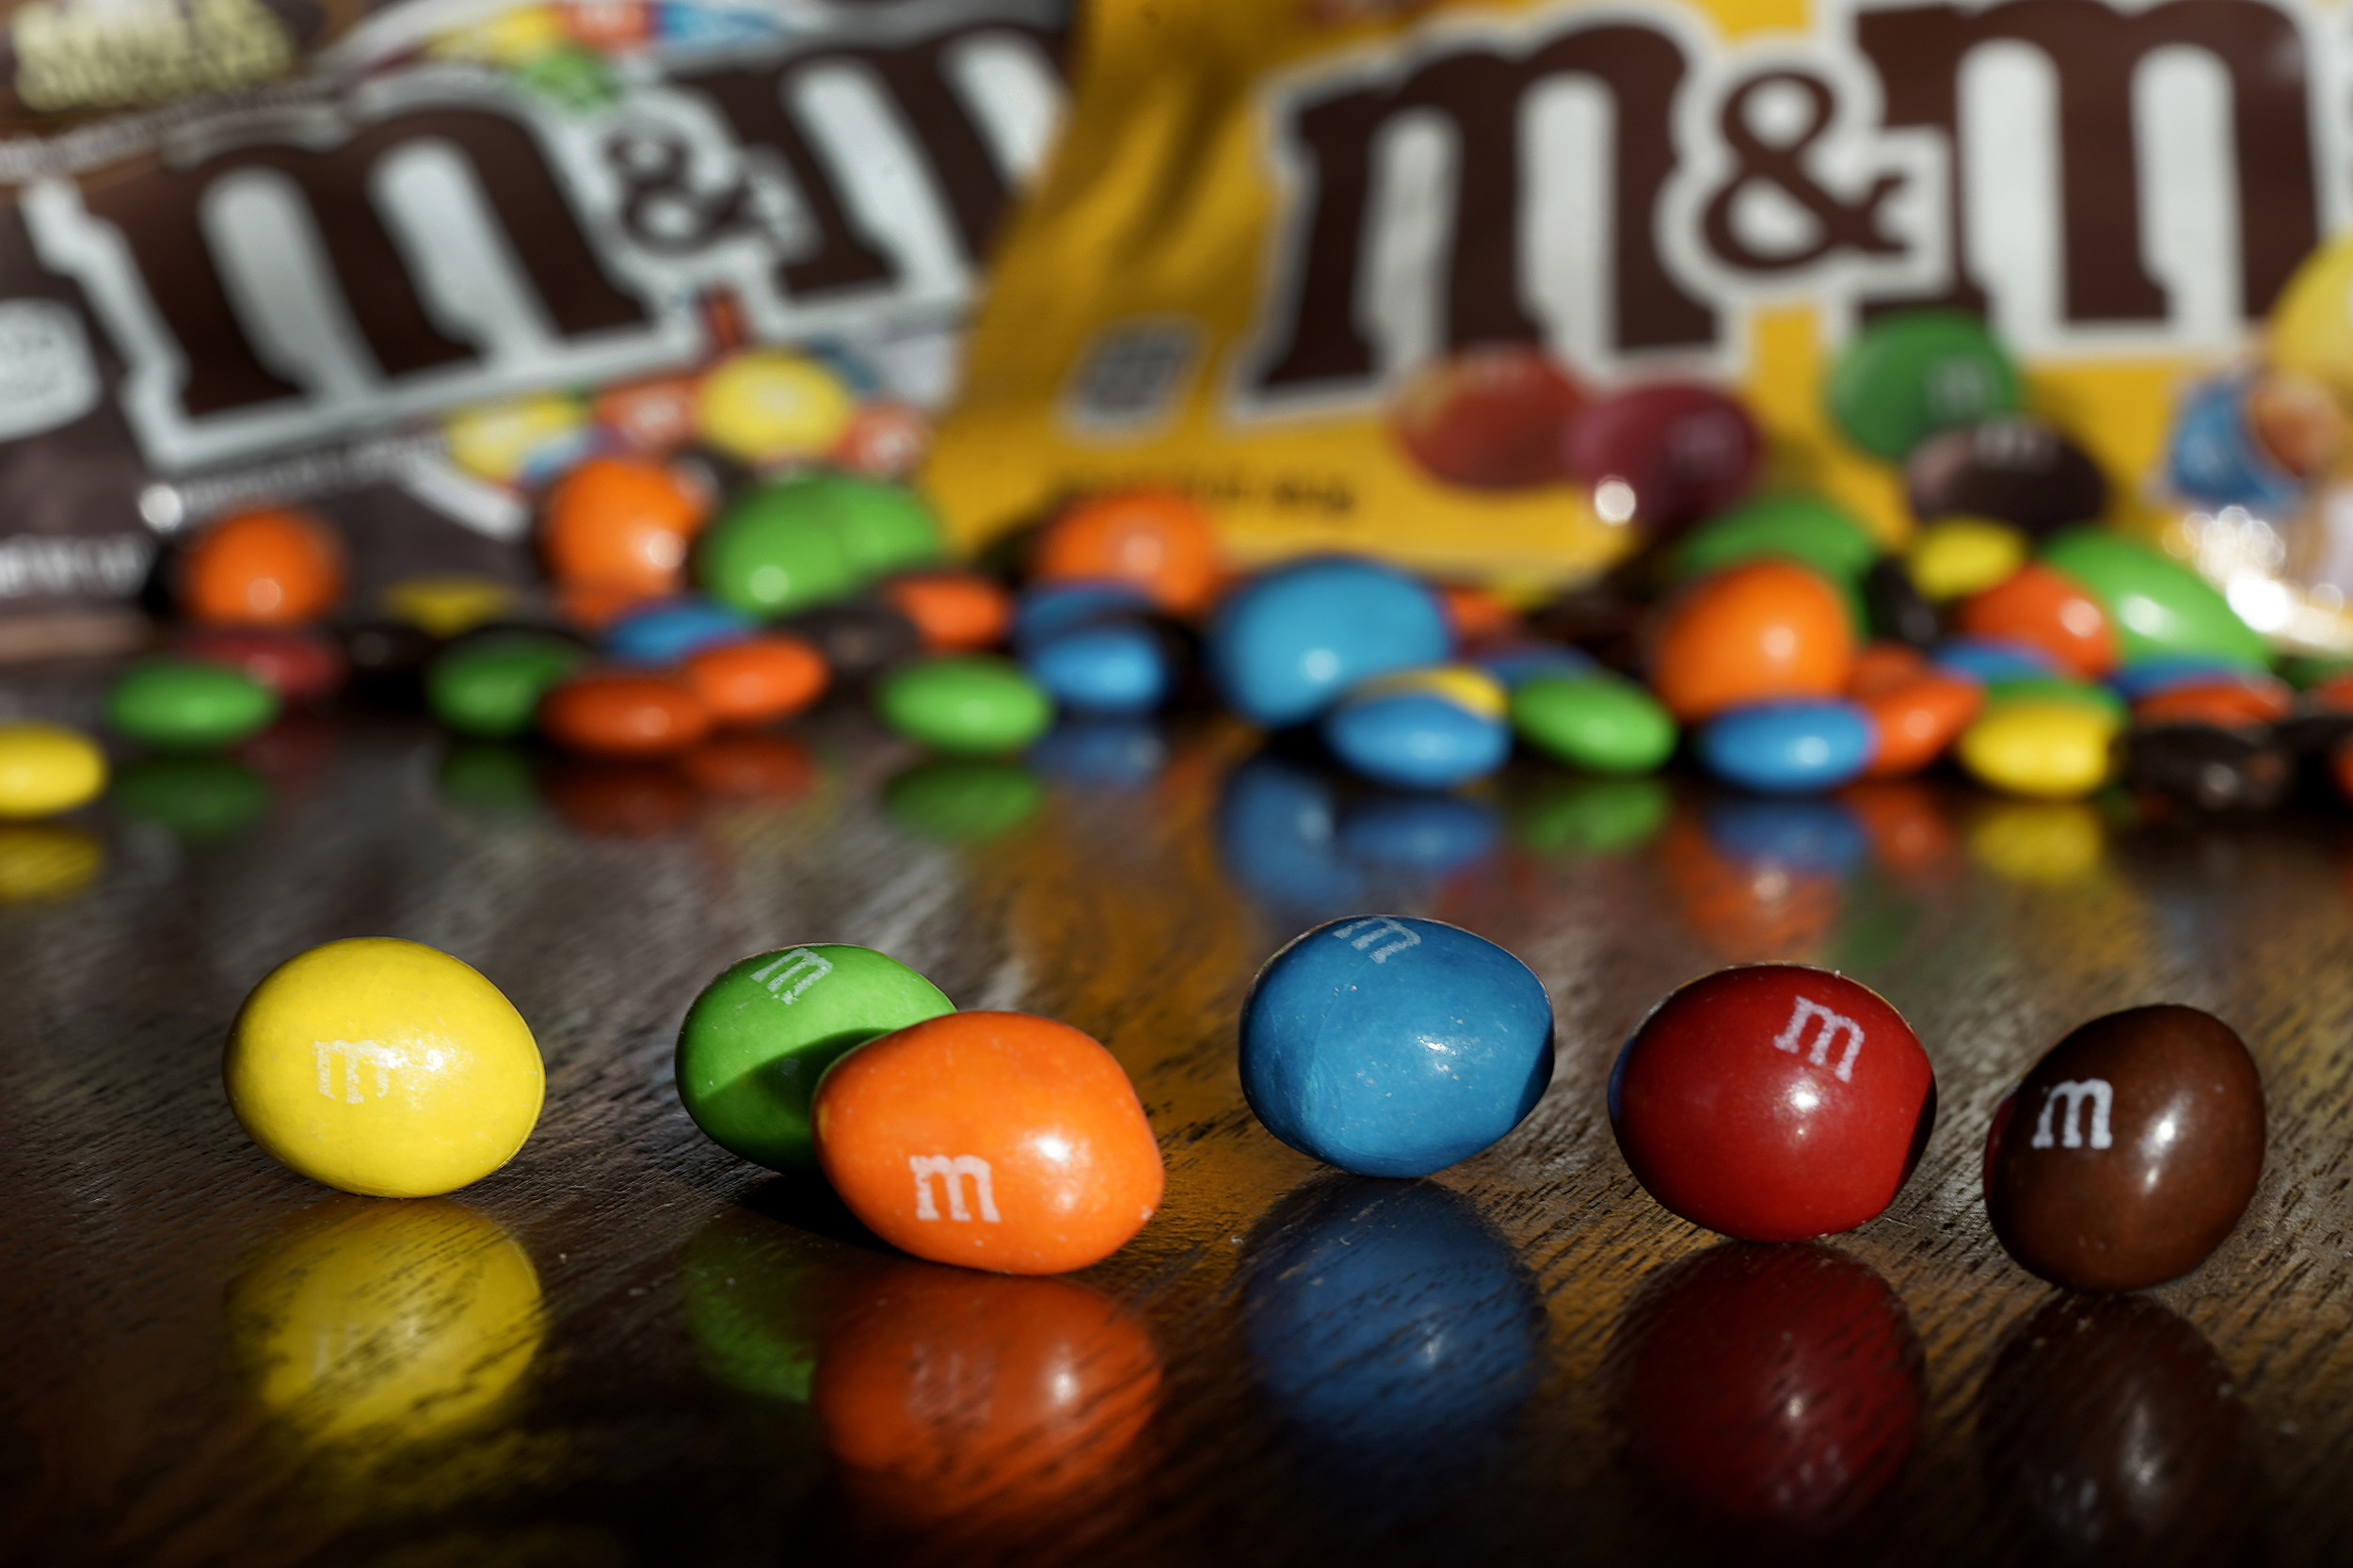 M&M's candy characters getting an updated look to be more 'inclusive' 